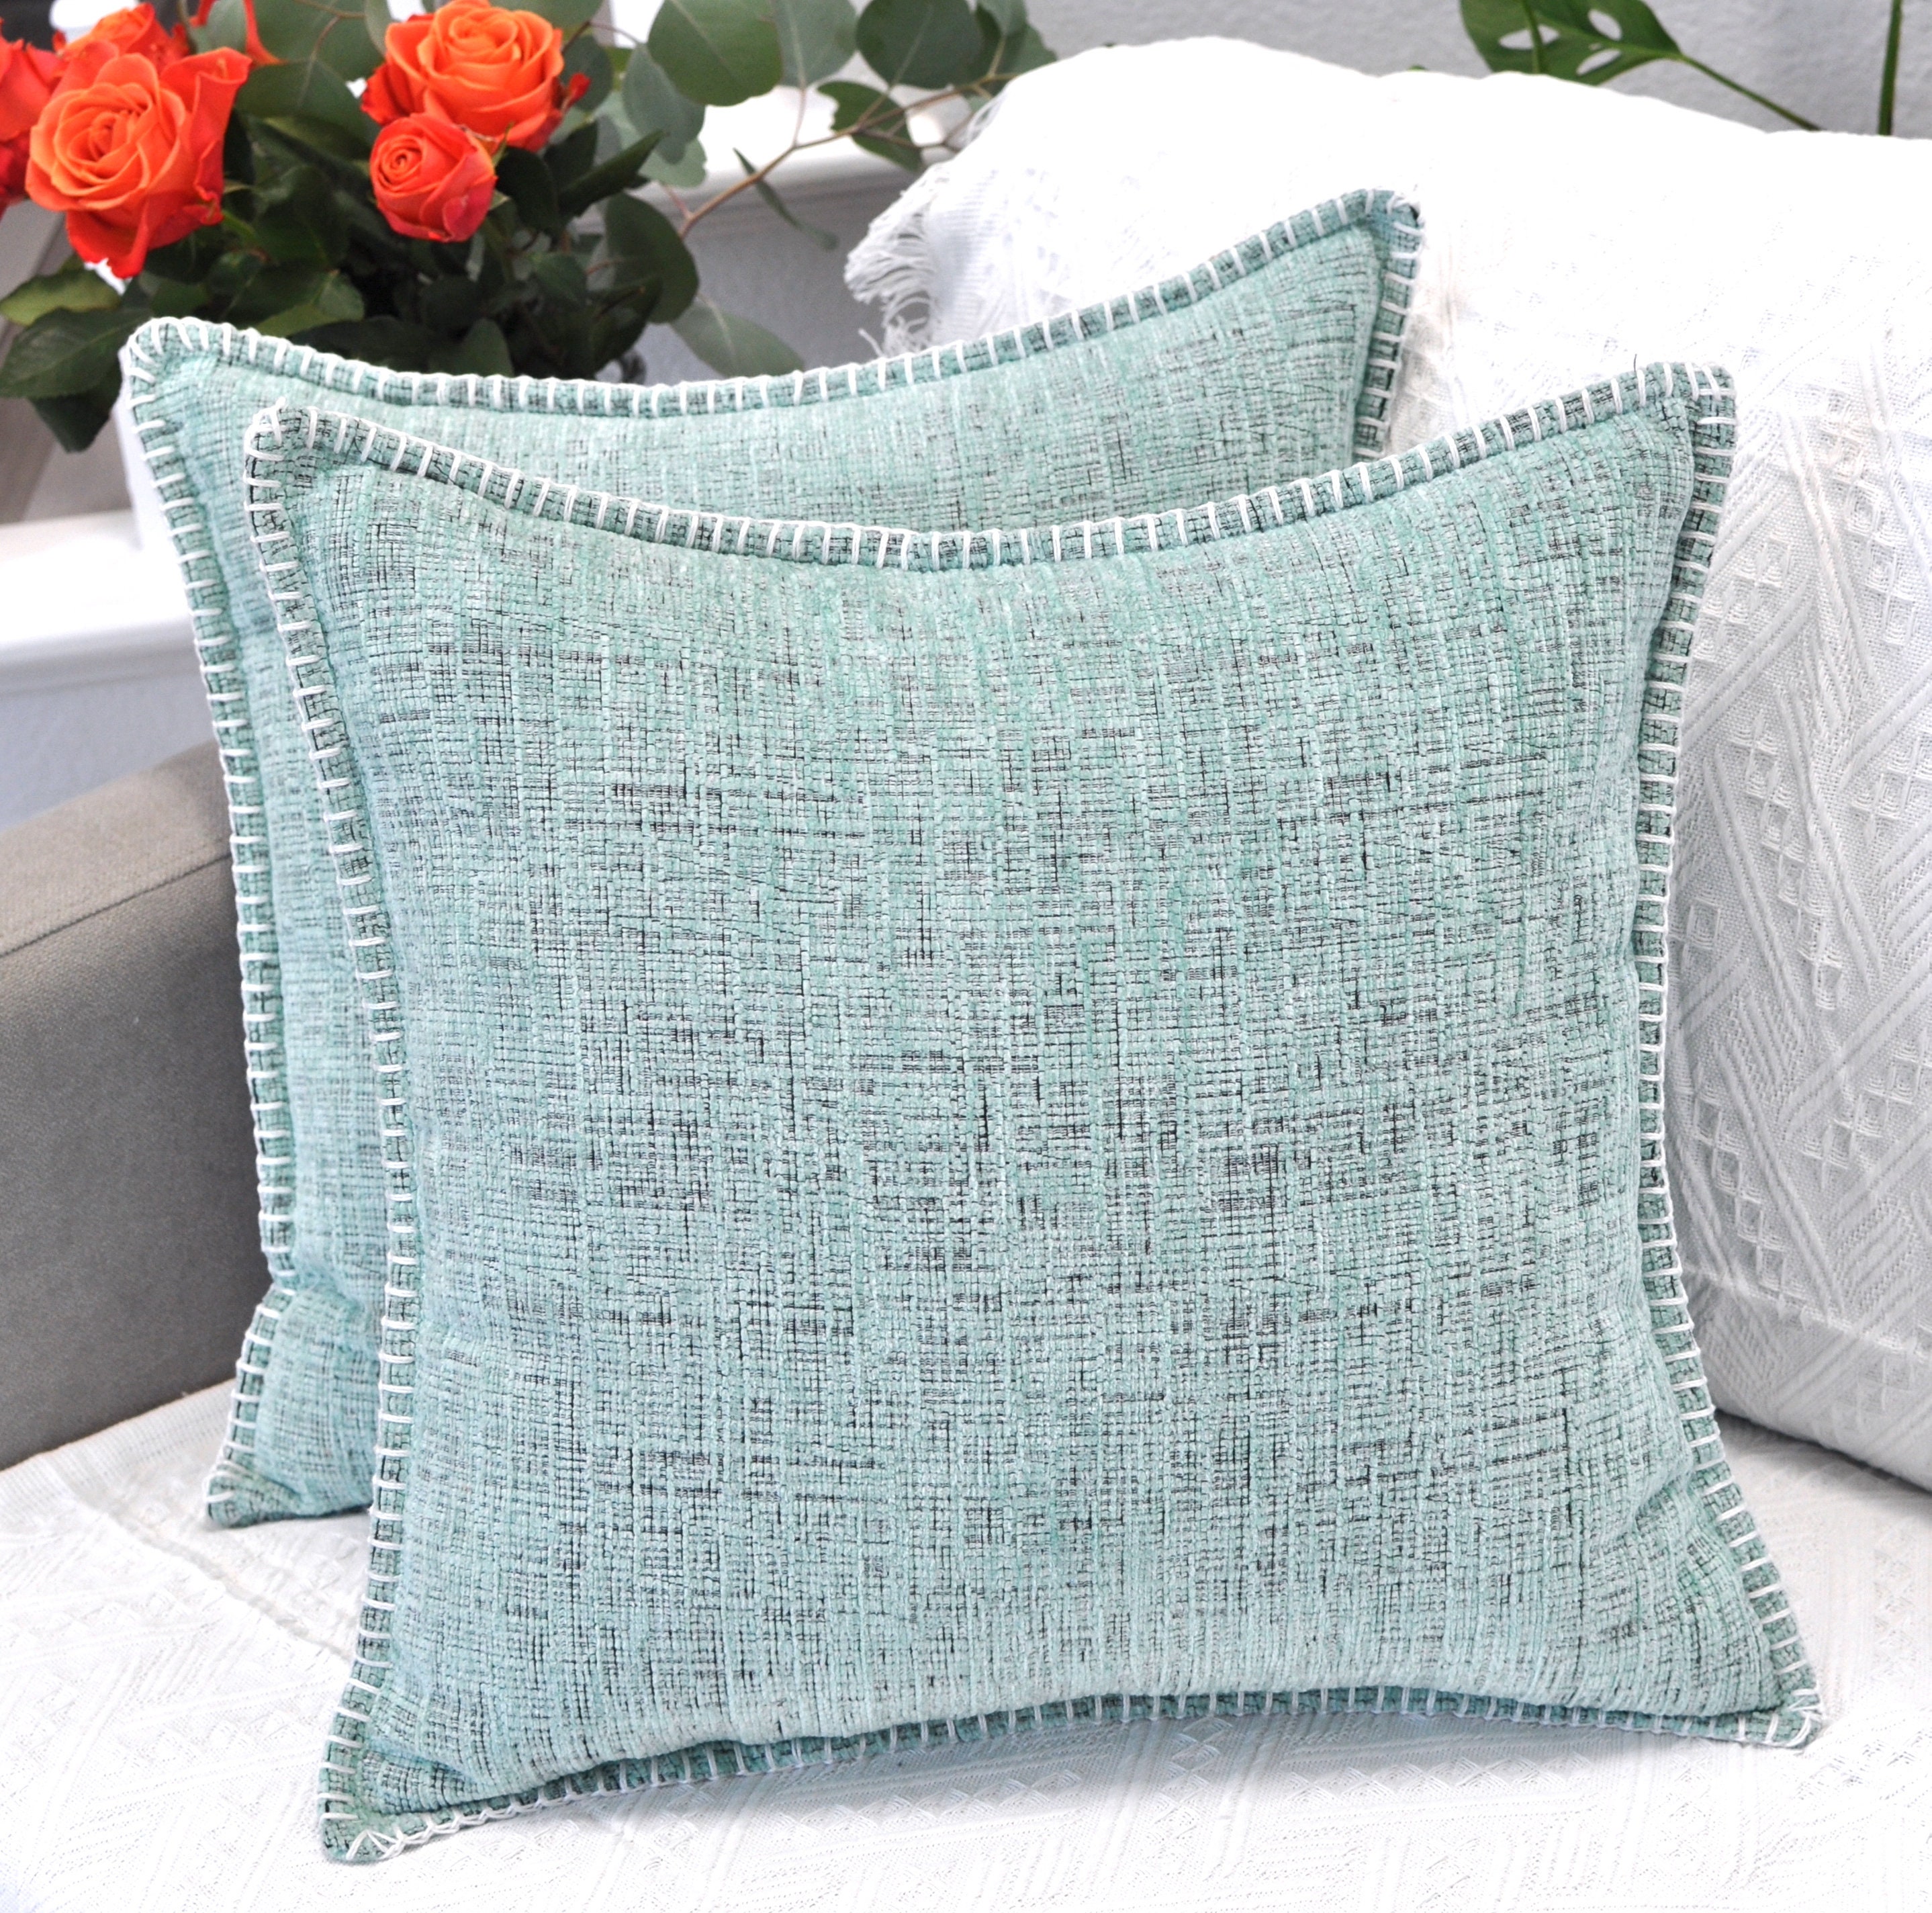 Teal Throw Pillows Covers for Couch 18x18 Set of 4 Flower Teal Decorative  Throw Pillows Rose Dark Turquoise Pillows - AliExpress